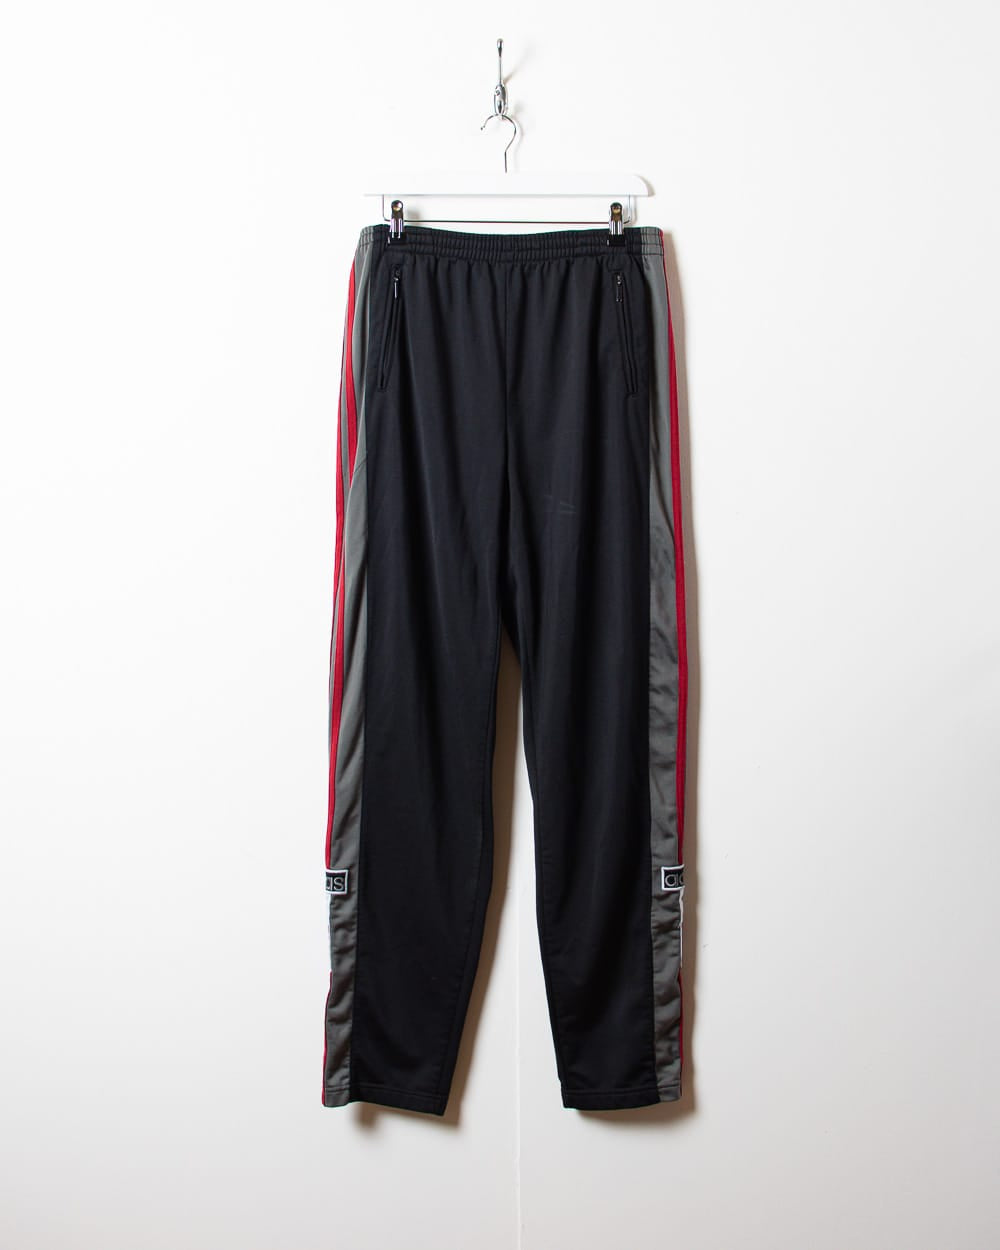 Adidas popper pants, Men's Fashion, Bottoms, Joggers on Carousell